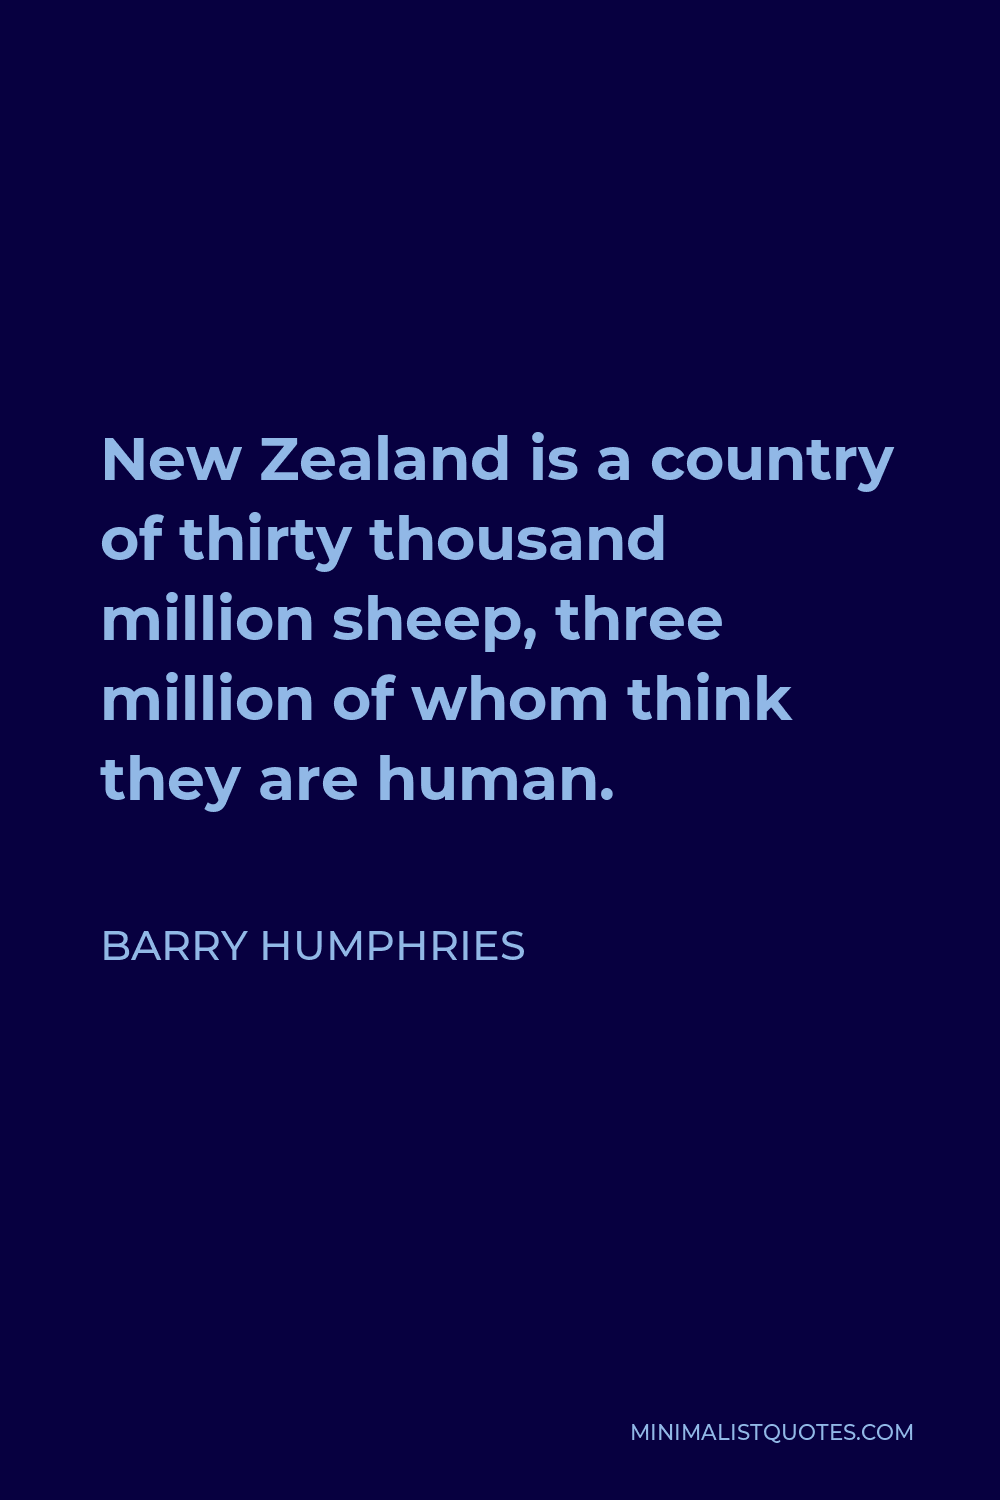 Barry Humphries Quote - New Zealand is a country of thirty thousand million sheep, three million of whom think they are human.